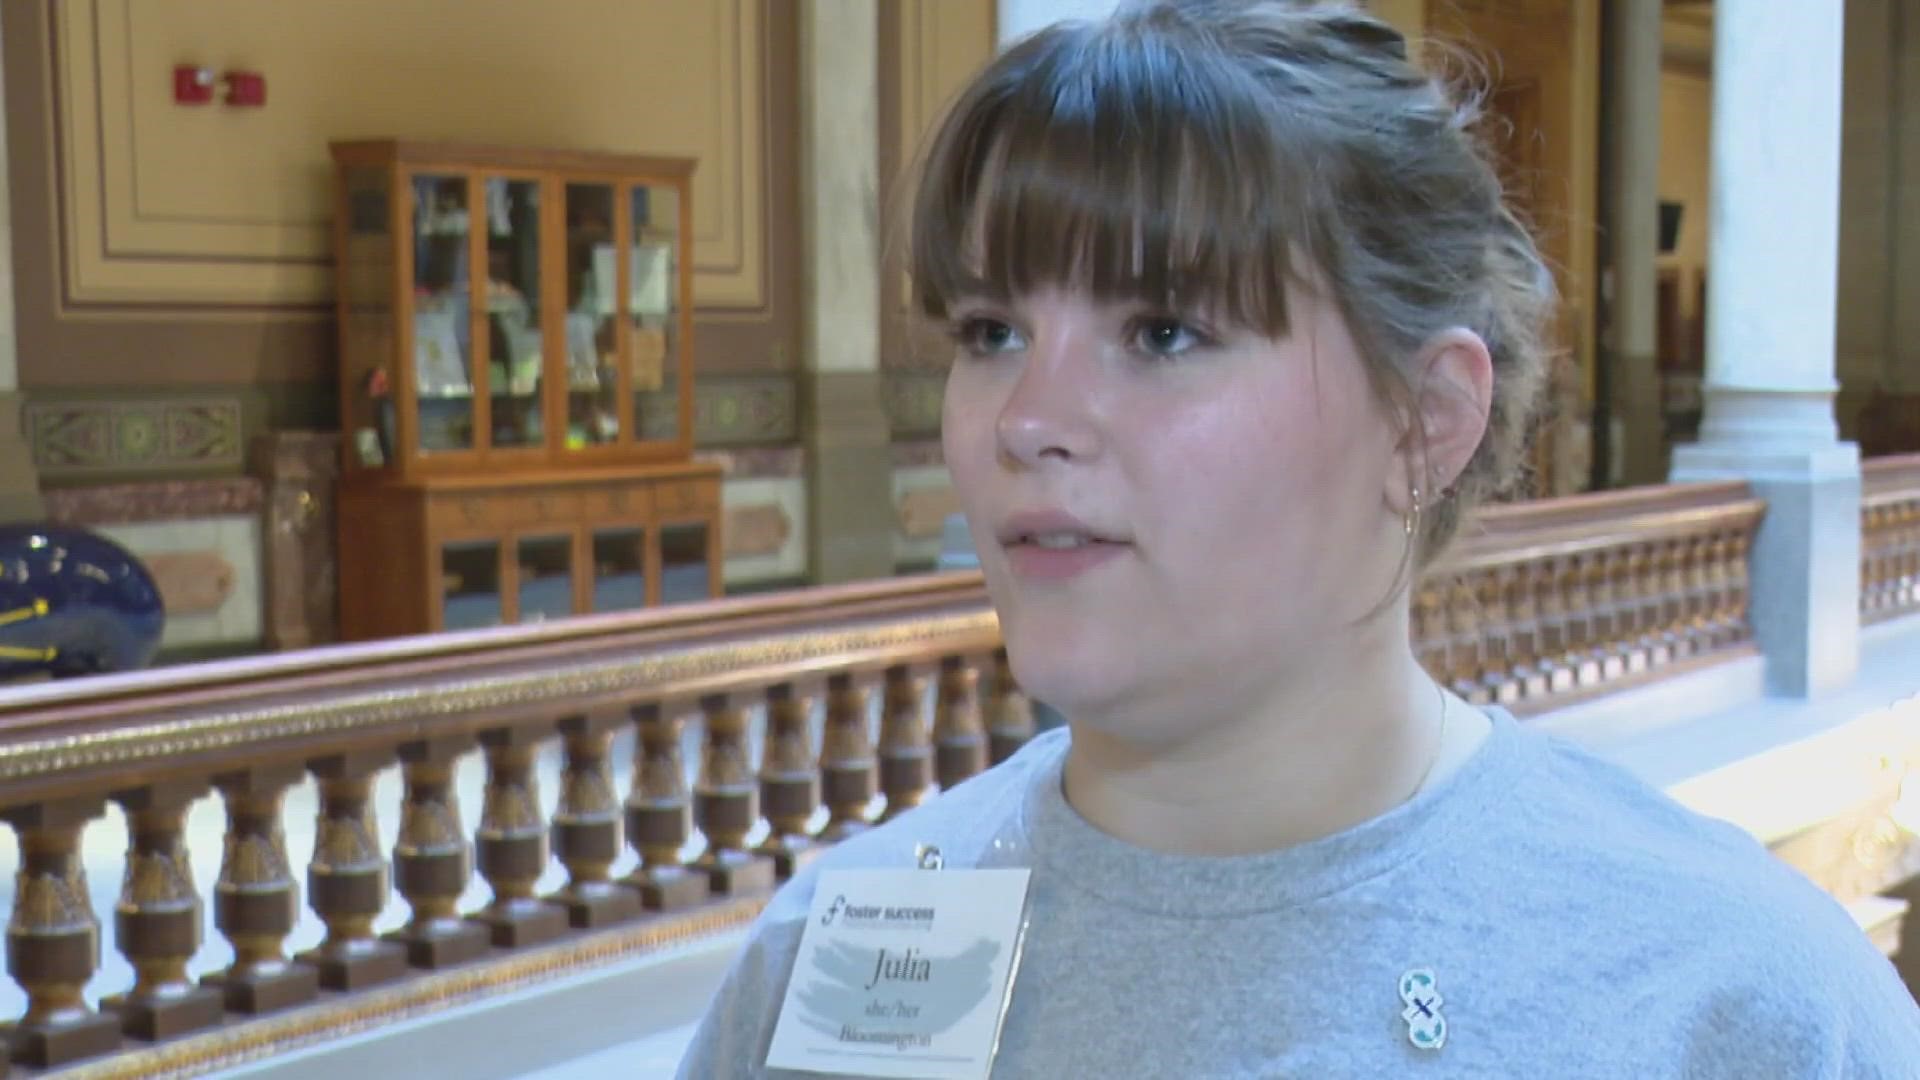 Foster youth came to the statehouse in support of a bill they say would close barriers for kids in foster care.